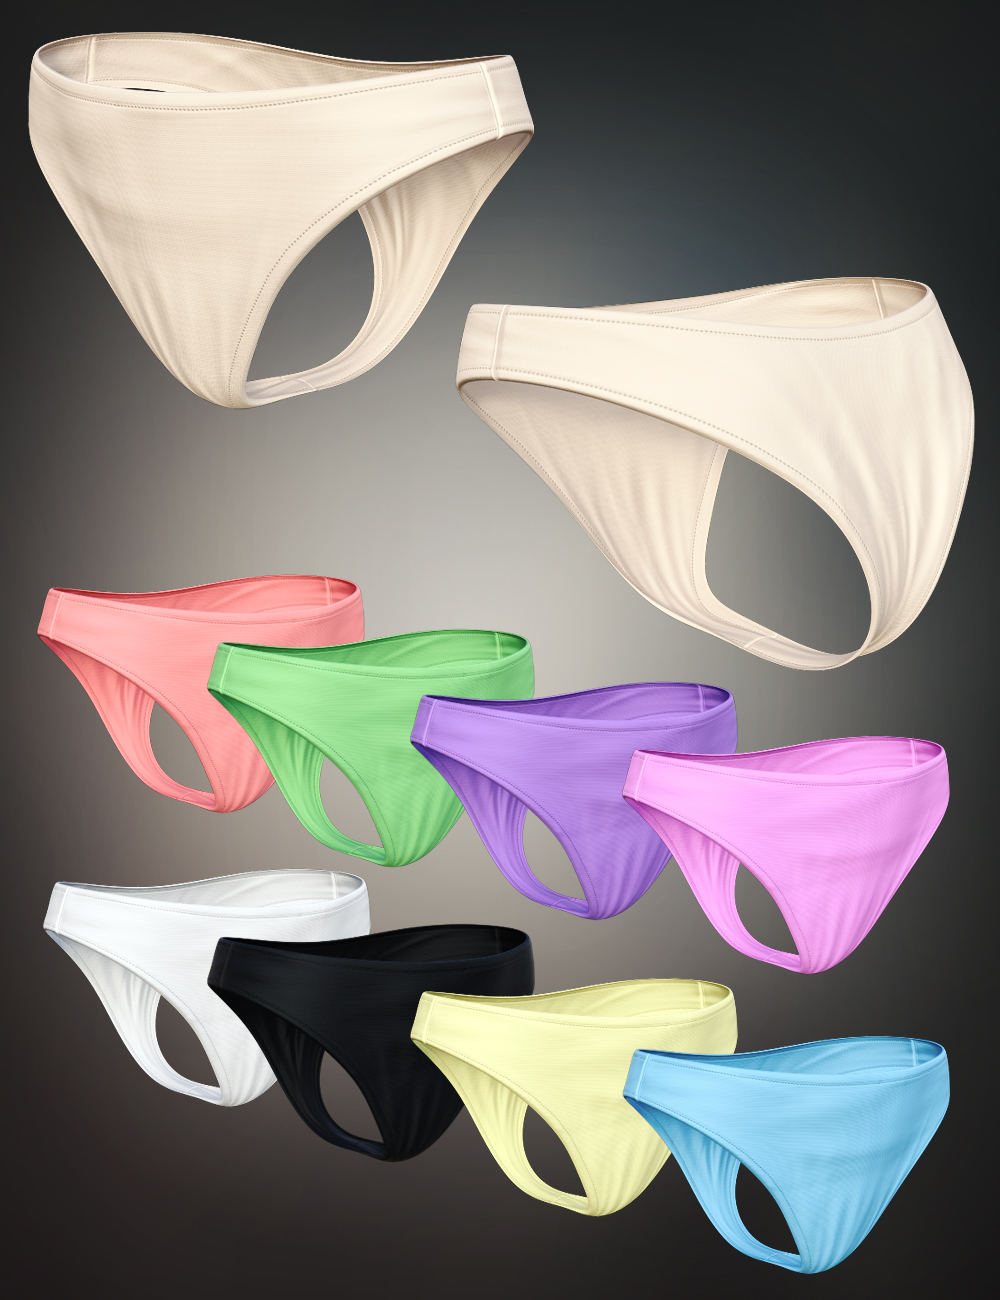 Gothic Style V6 Underwear for Genesis 8 and 8.1 Females